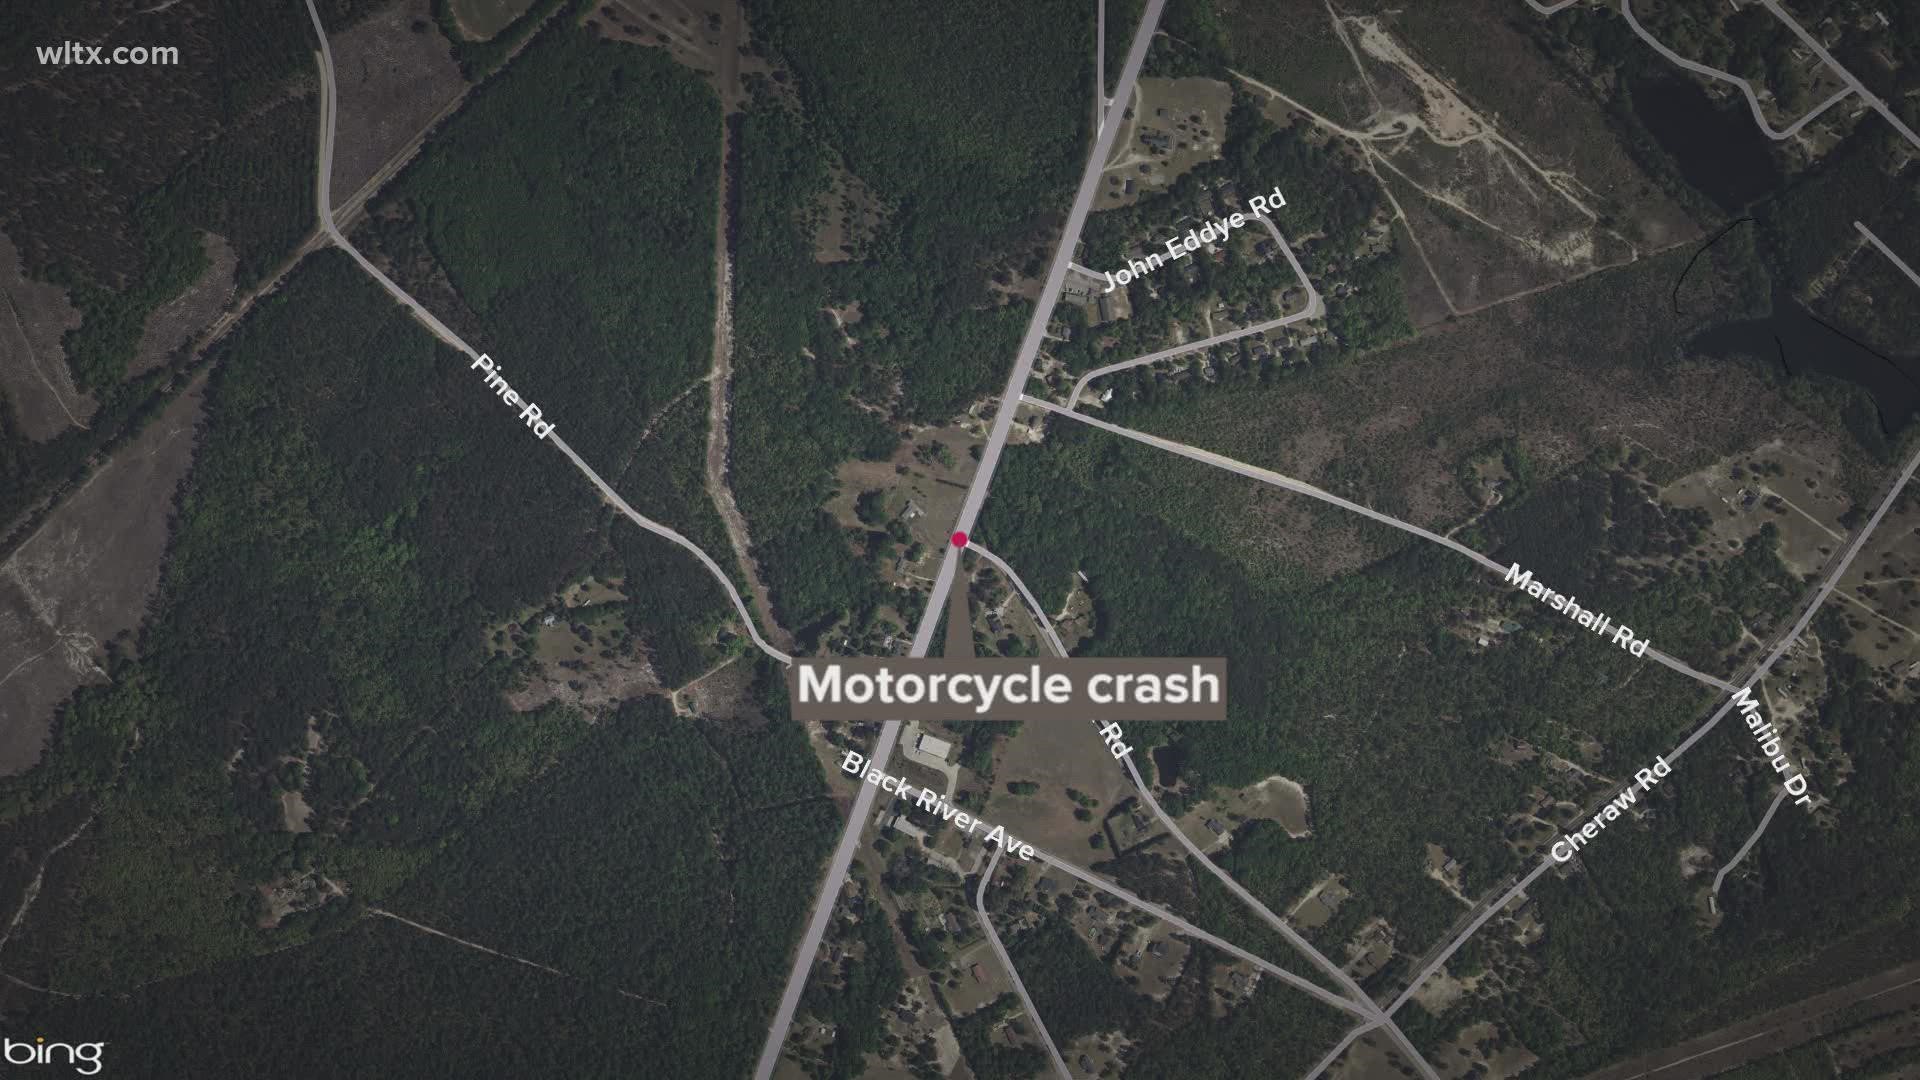 The crash remains under investigation by the South Carolina Highway Patrol.